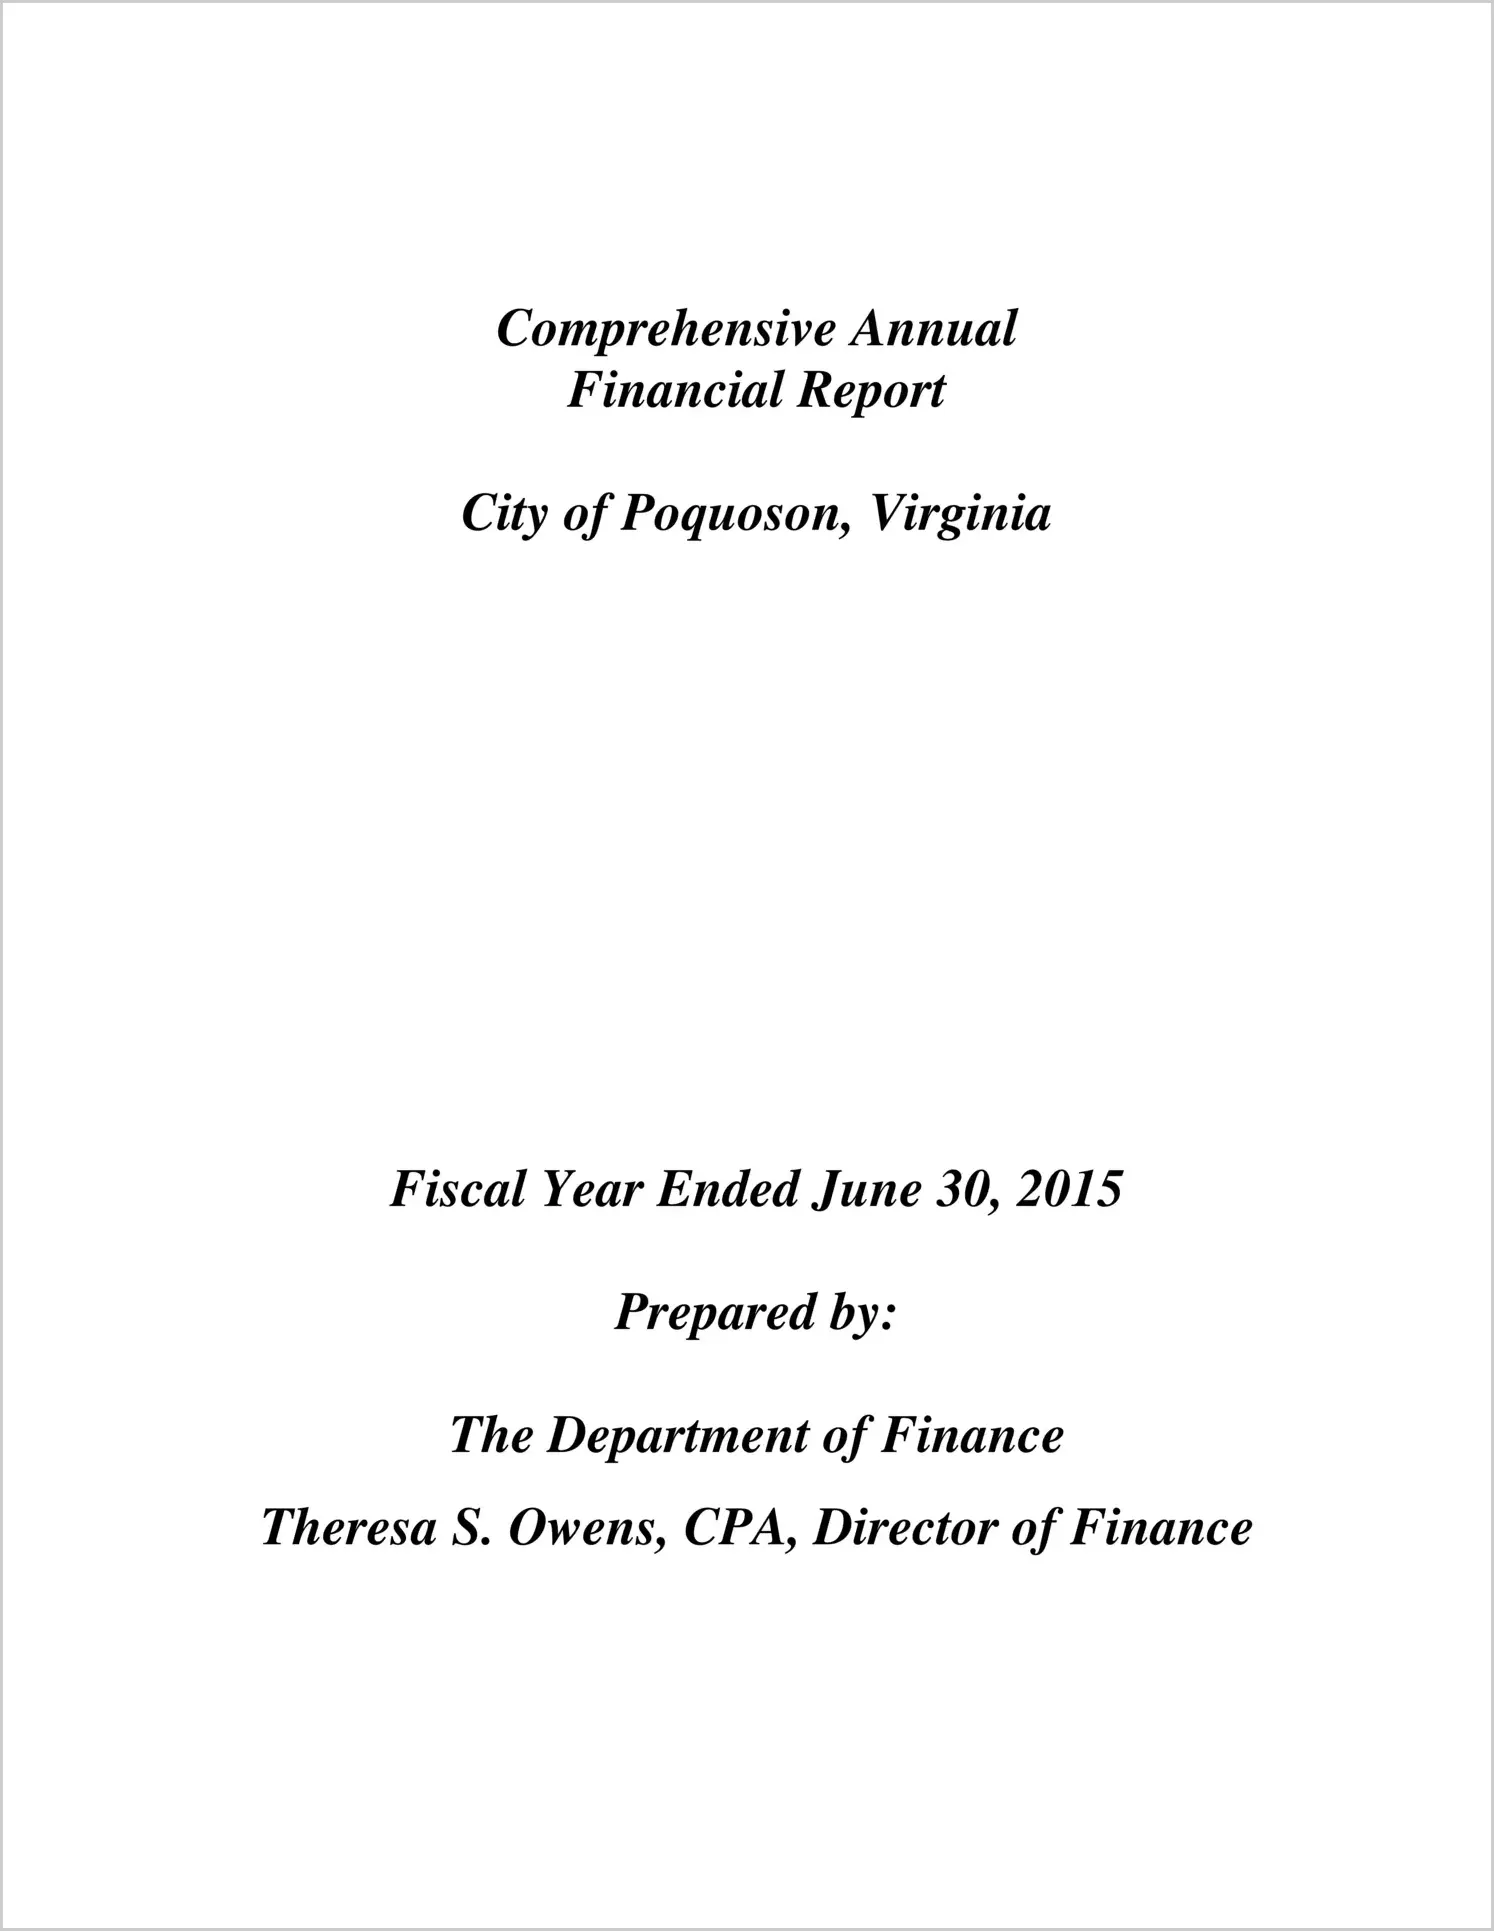 2015 Annual Financial Report for City of Poquoson